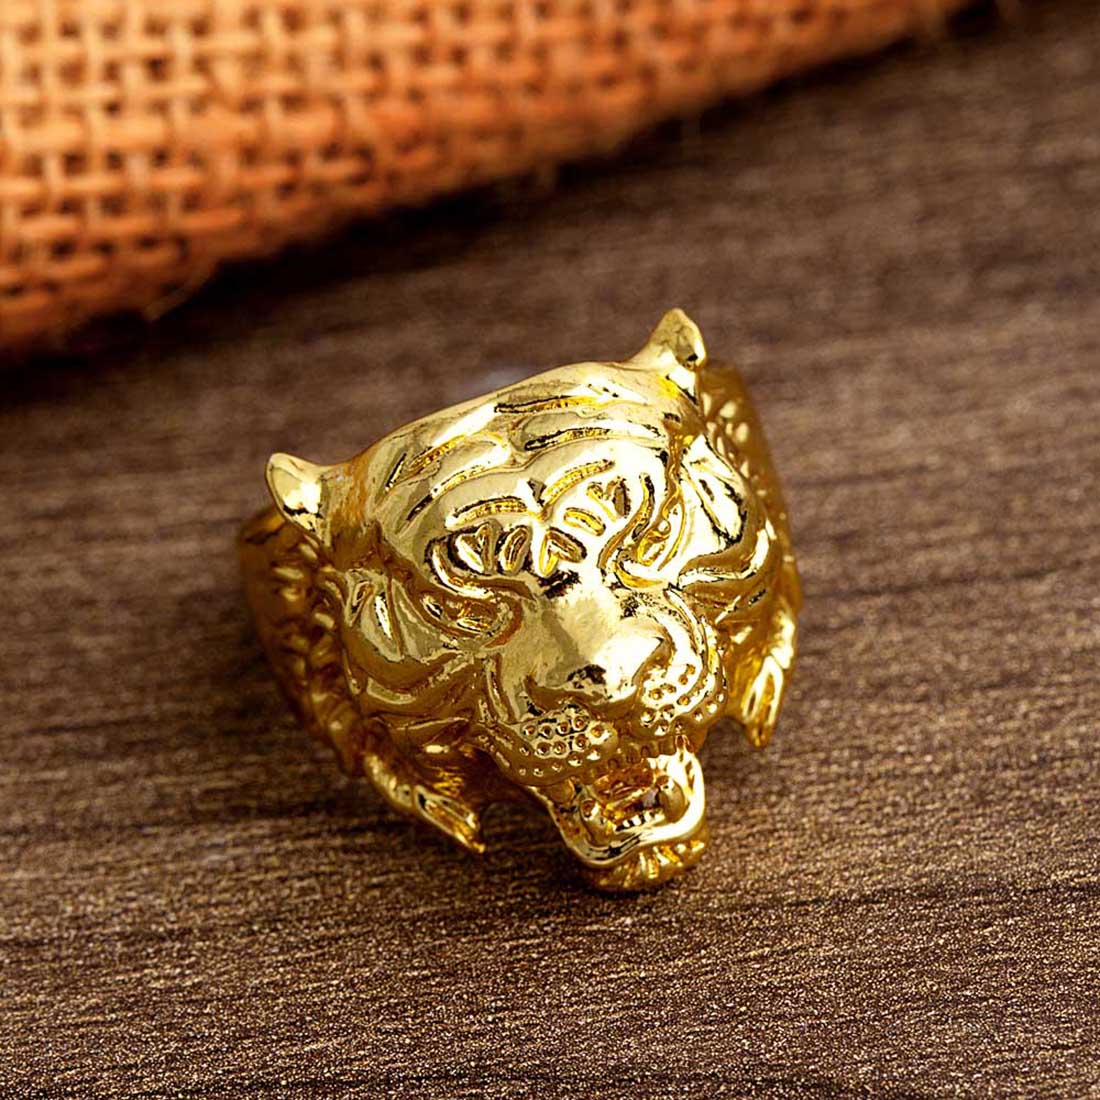 Amazon.com: Panther Ring, Panther Jewellery Ring, Jaguar Ring For Her,  Women's Cat Ring, Statement Leopard Ring For, lion Ring, 14k/18k Gold Tiger  Ring. : Handmade Products